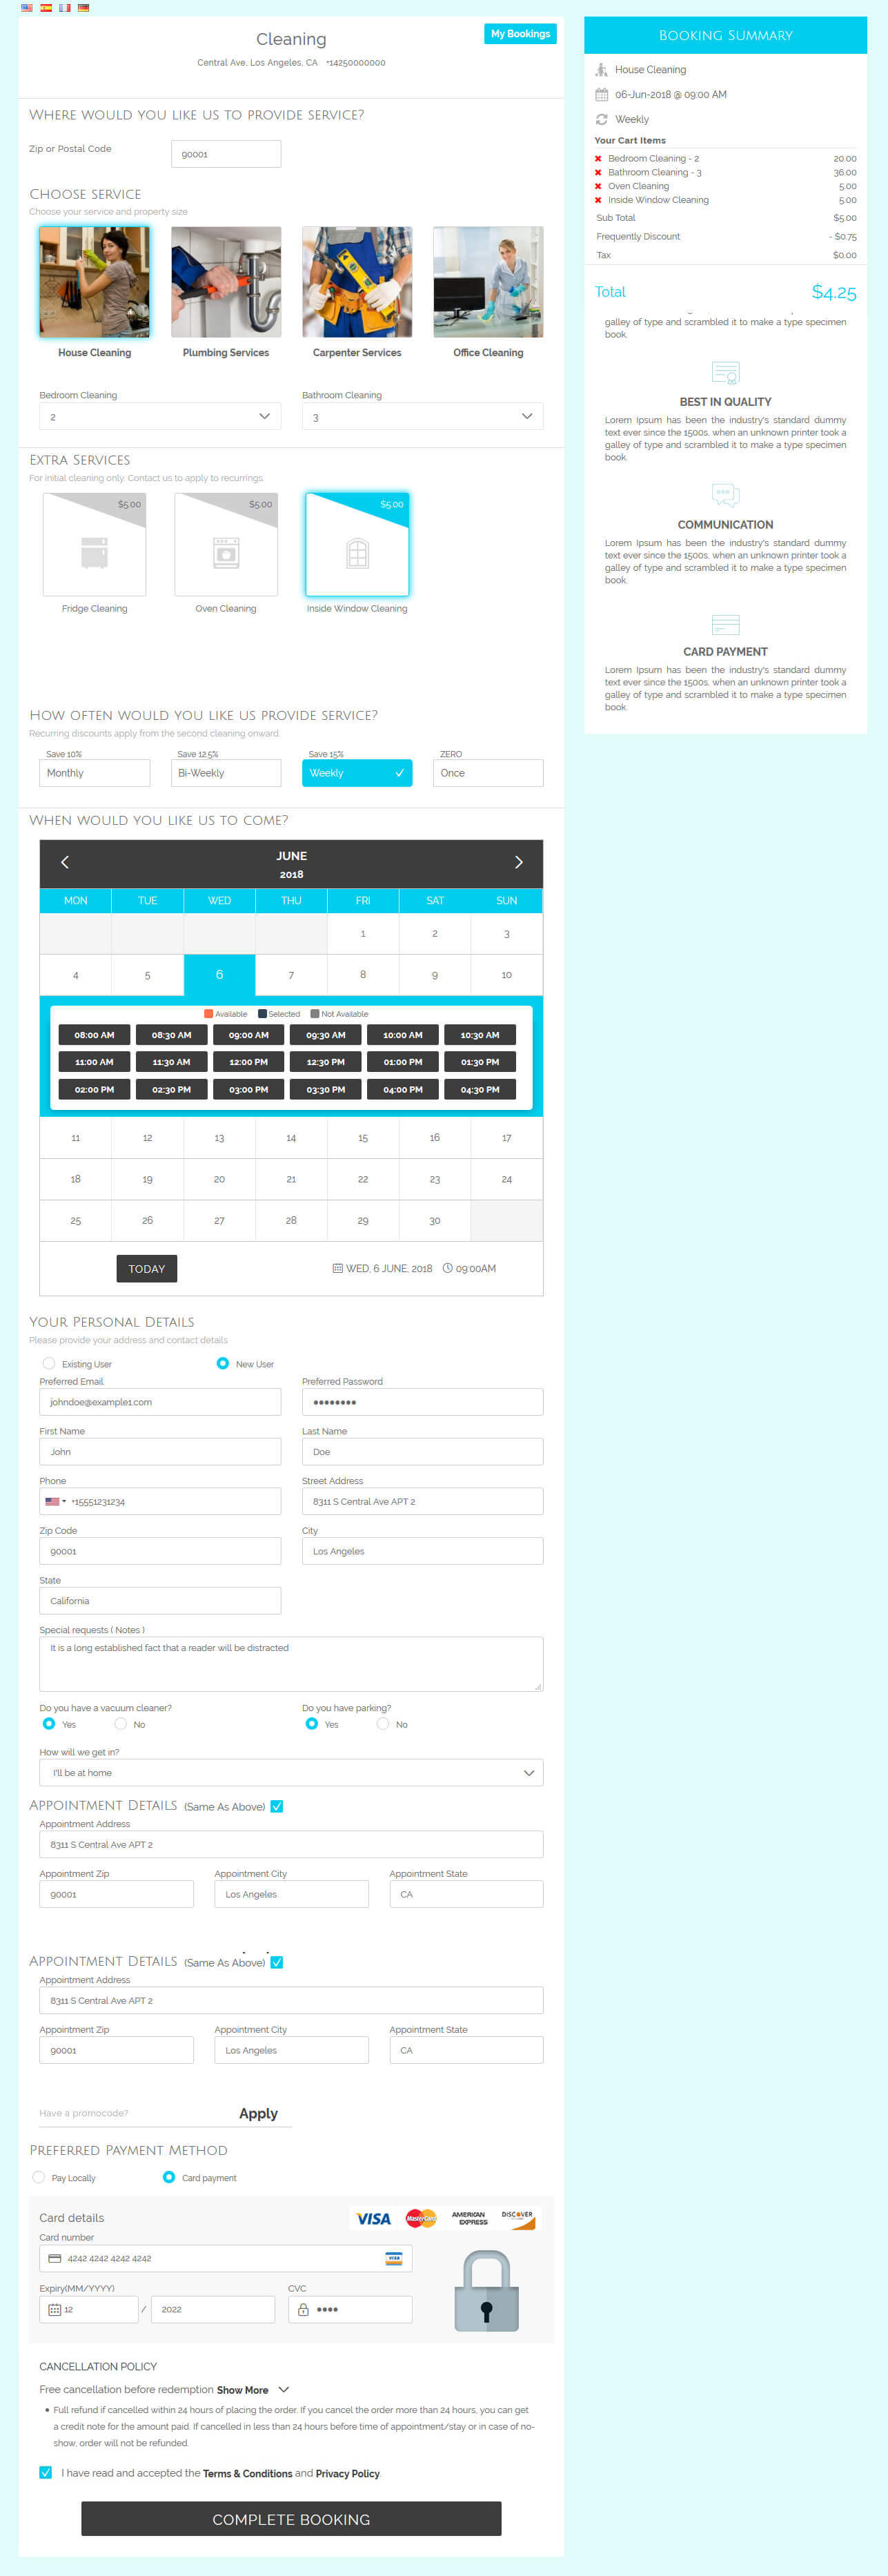 Online bookings management system for maid services and cleaning companies - Cleanto - 25